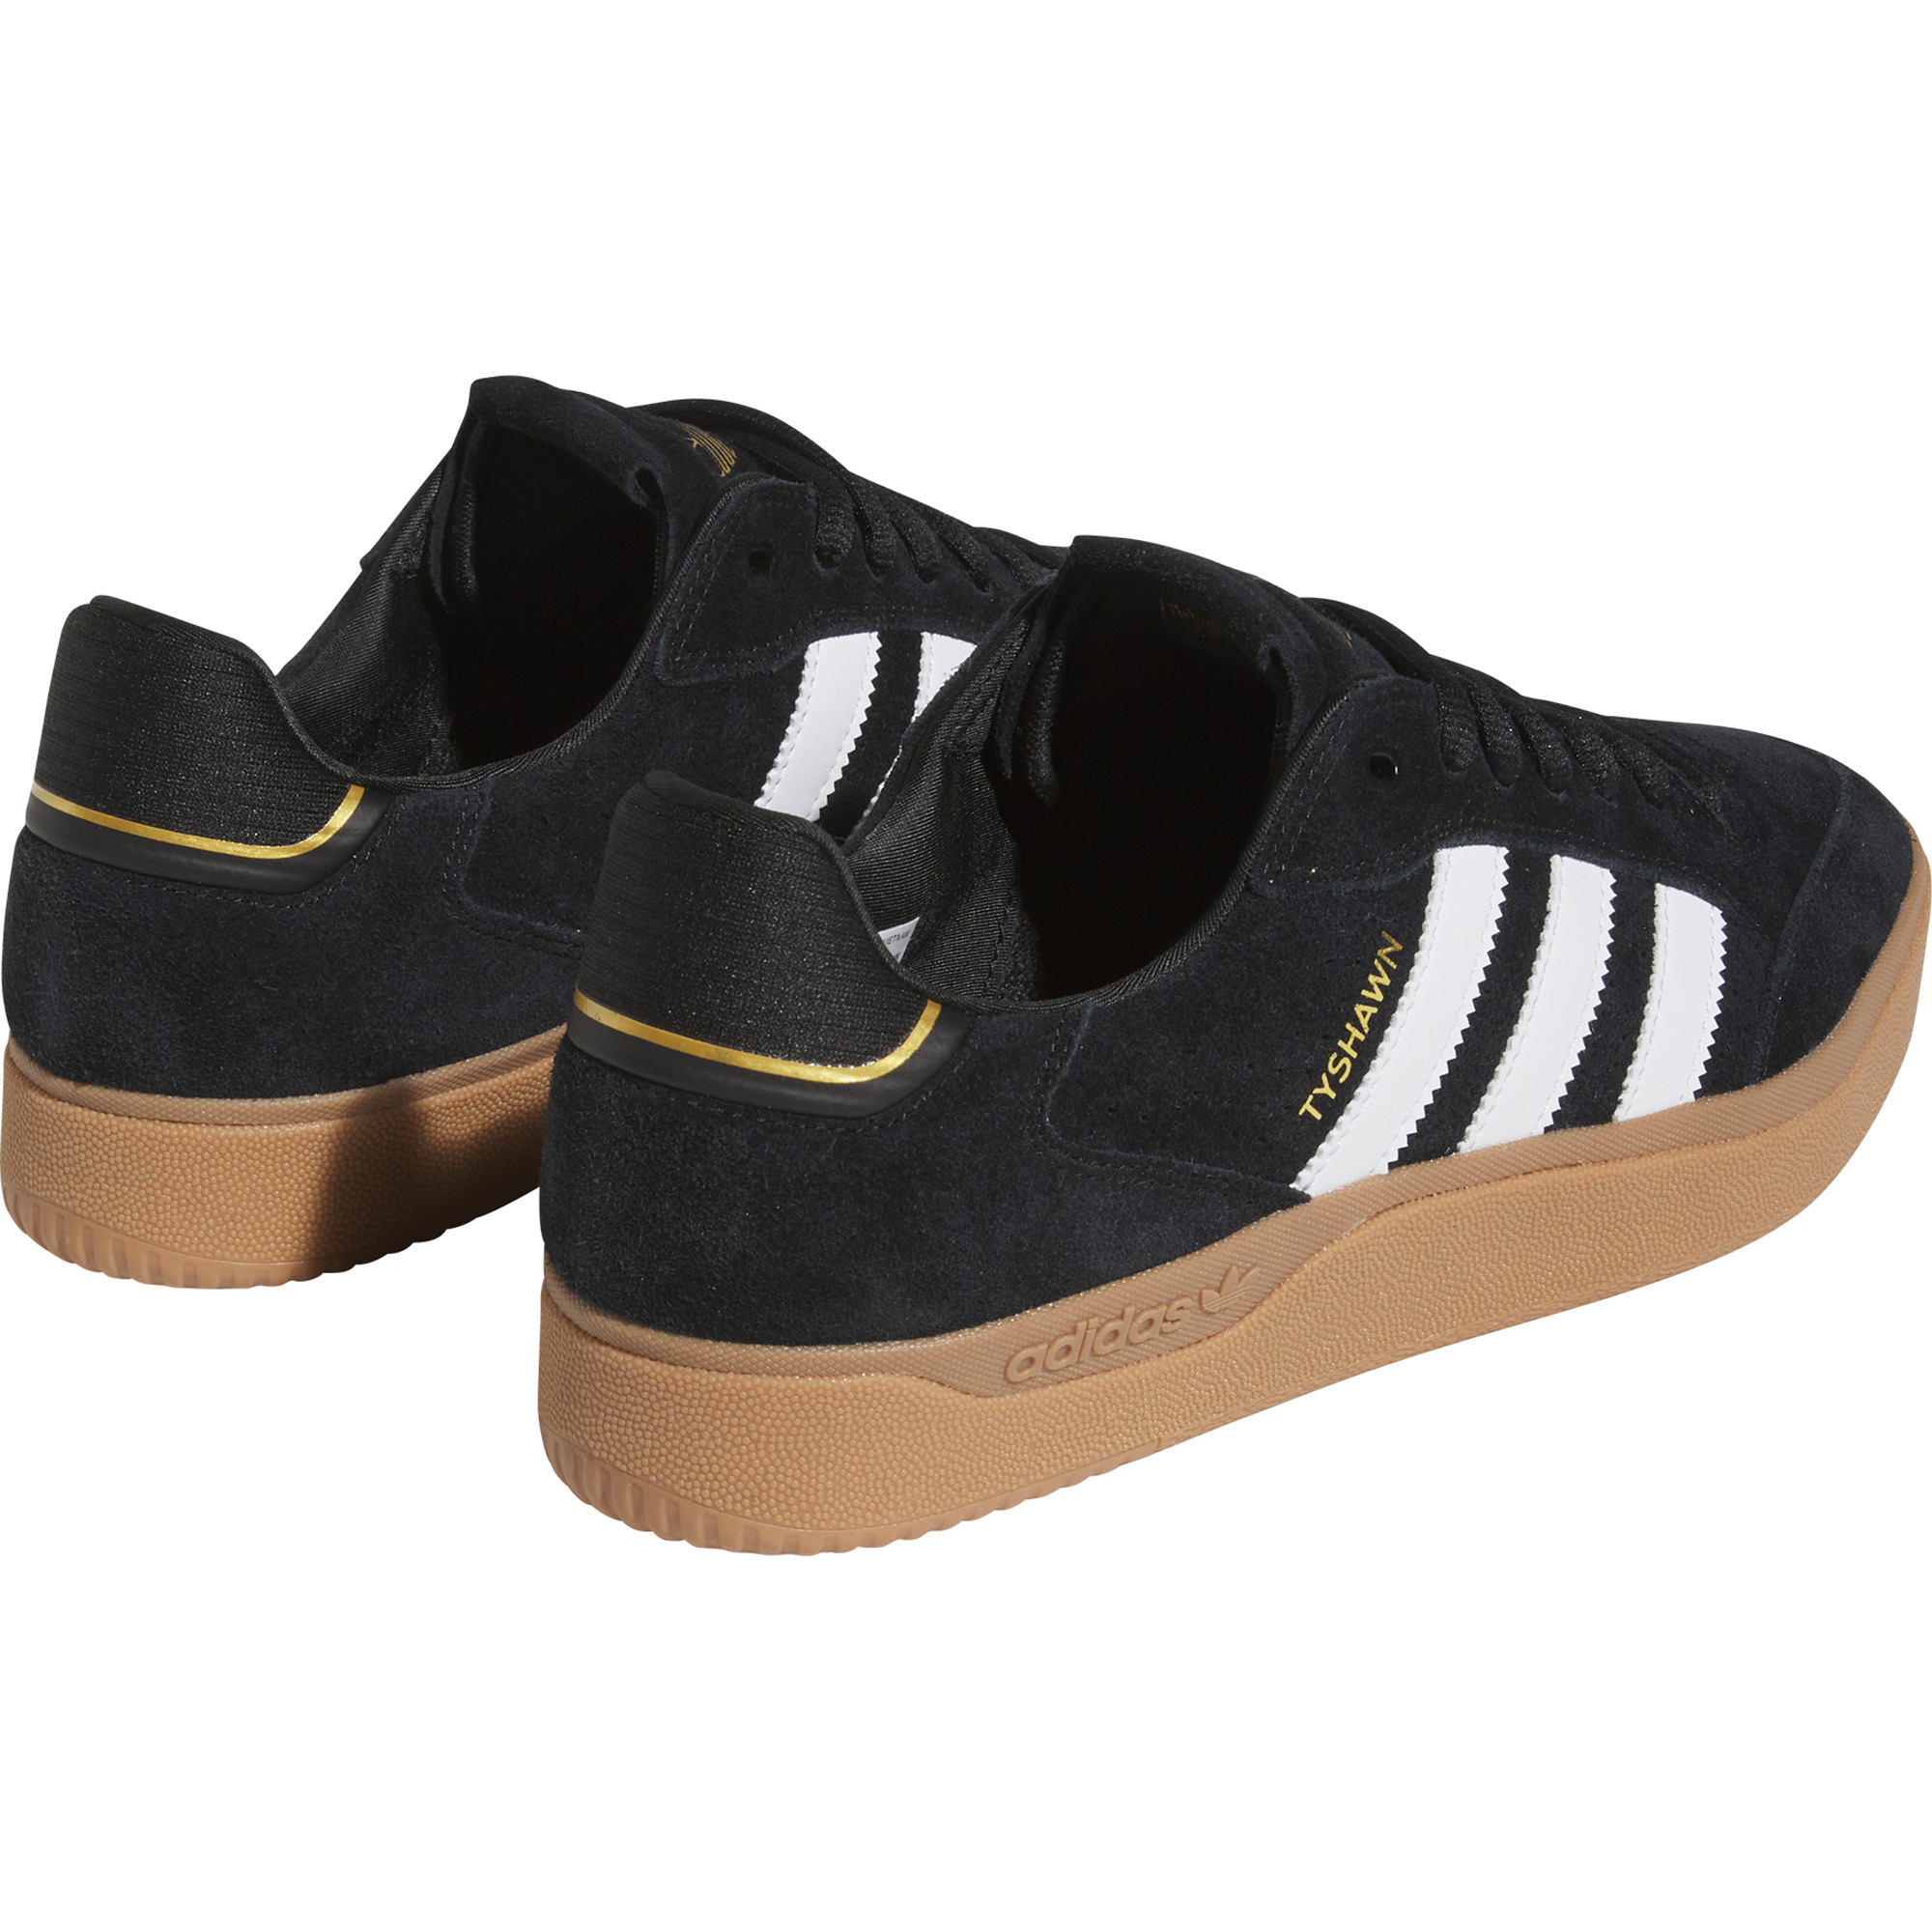 Adidas Tyshawn Low Men's Trainers/Skate Shoes